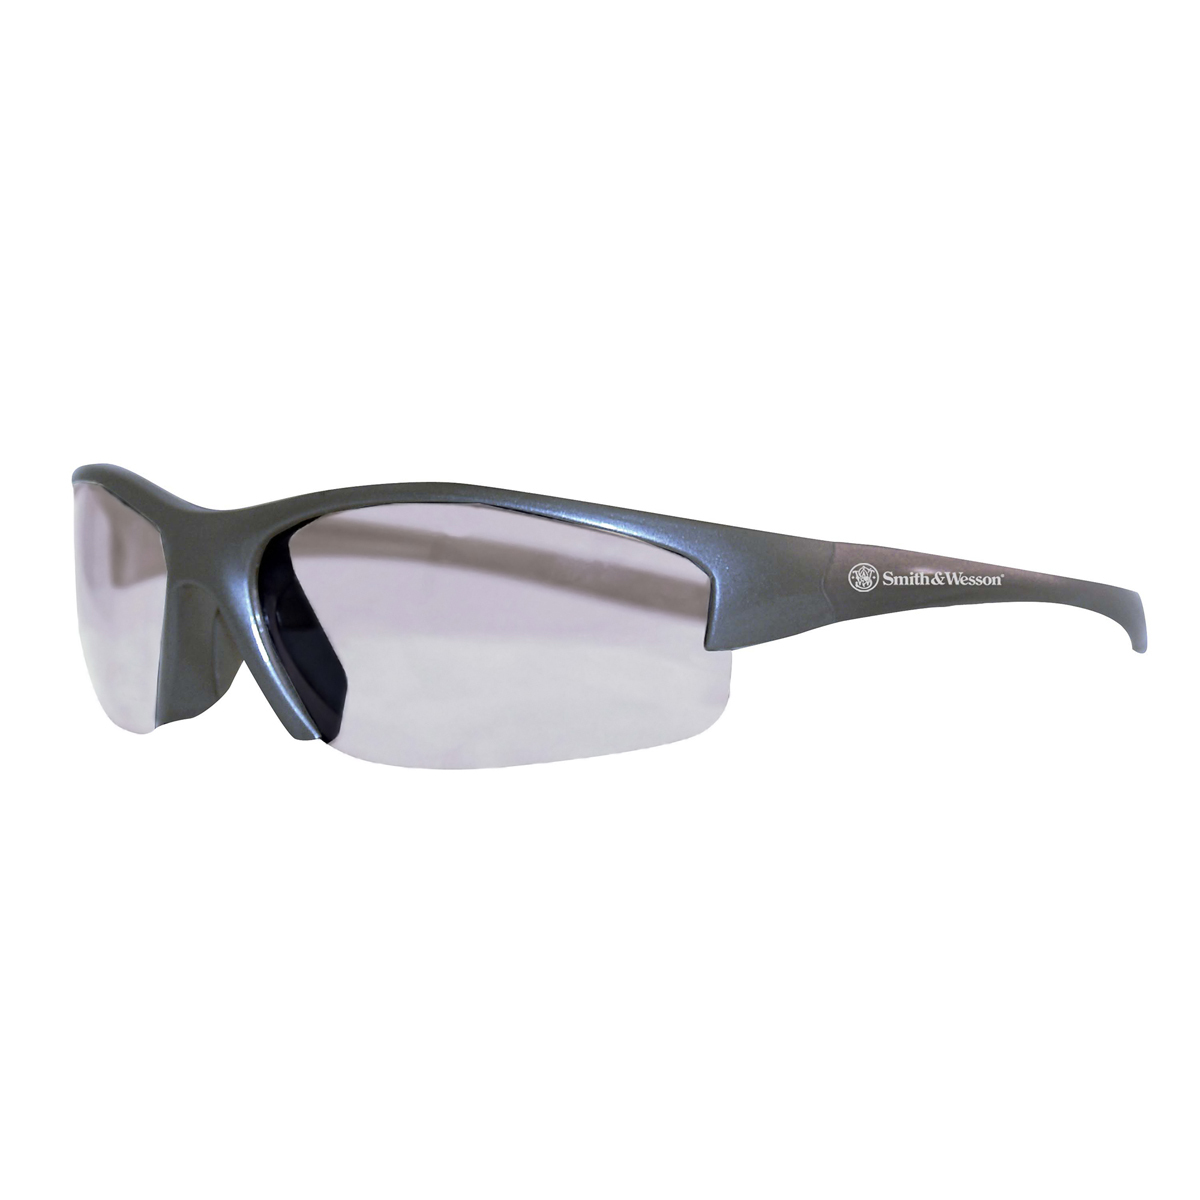 Kimberly-Clark Professional* Smith & Wesson® Equalizer* Gray Safety Glasses With Clear Indoor/Outdoor Hard Coat Lens (Availabili